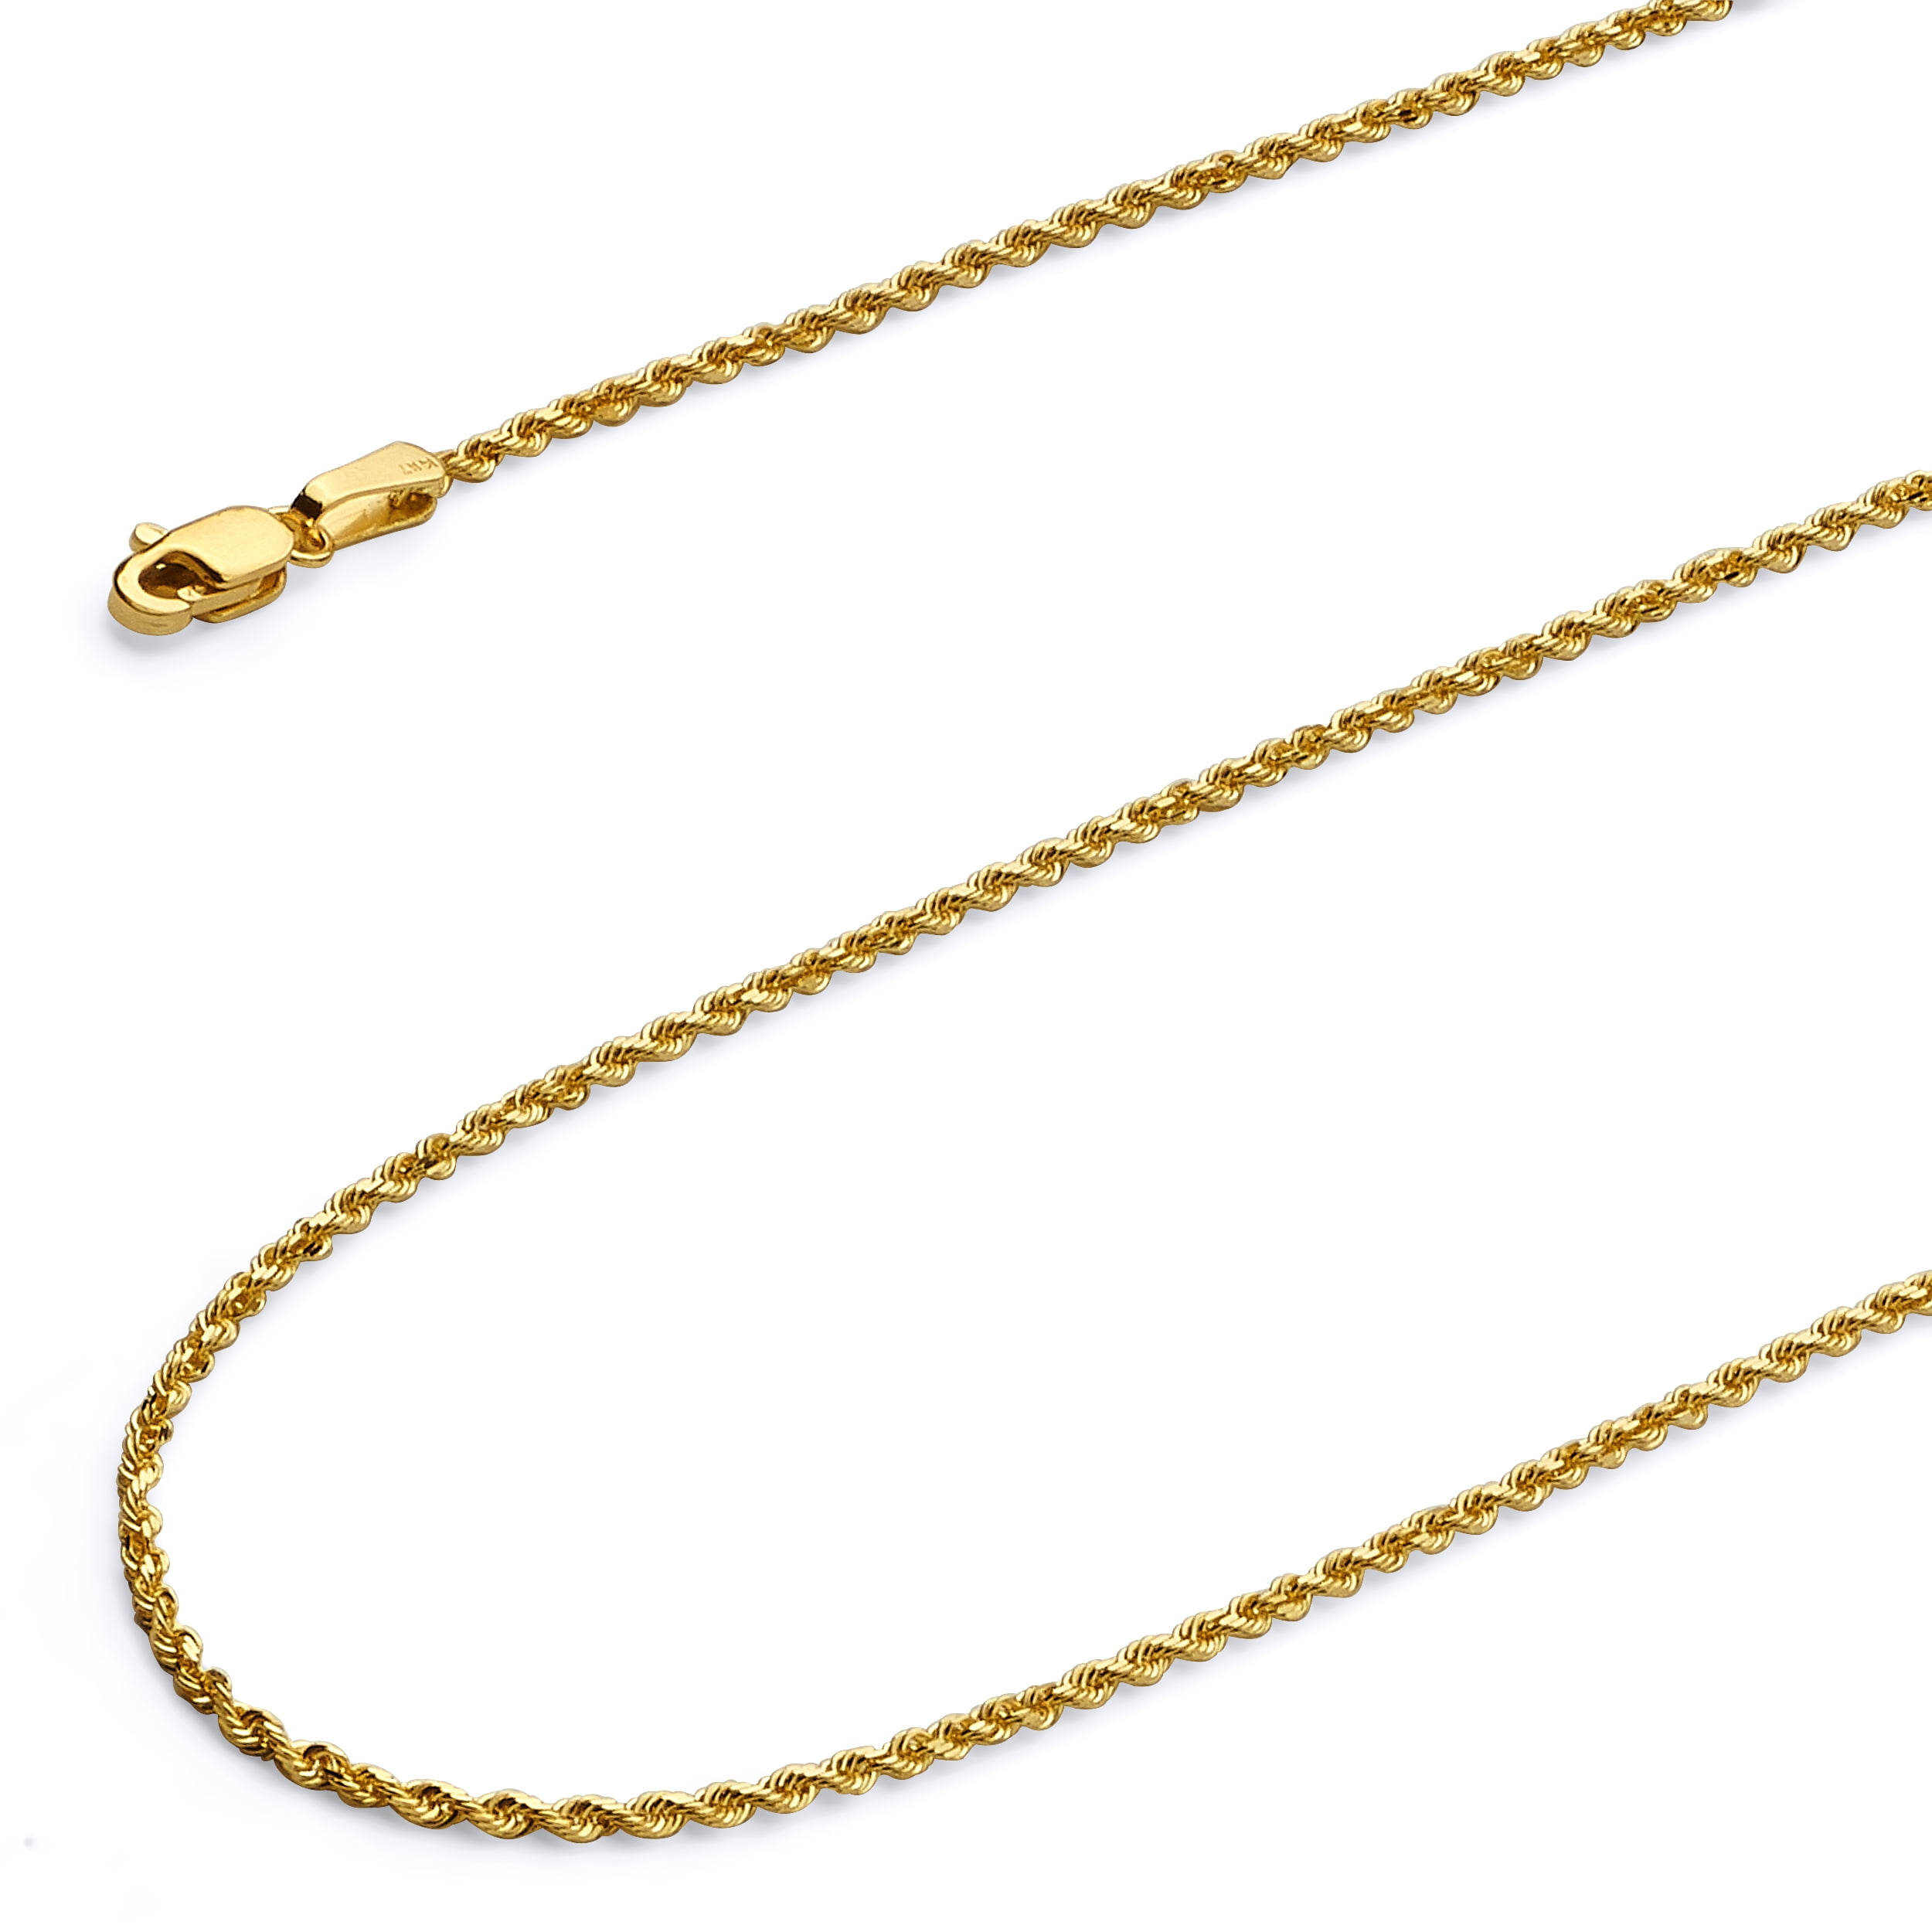 Wellingsale 14k Yellow OR White Gold Solid 1.5mm Flat Open wheat Chain Necklace with Lobster Claw Clasp